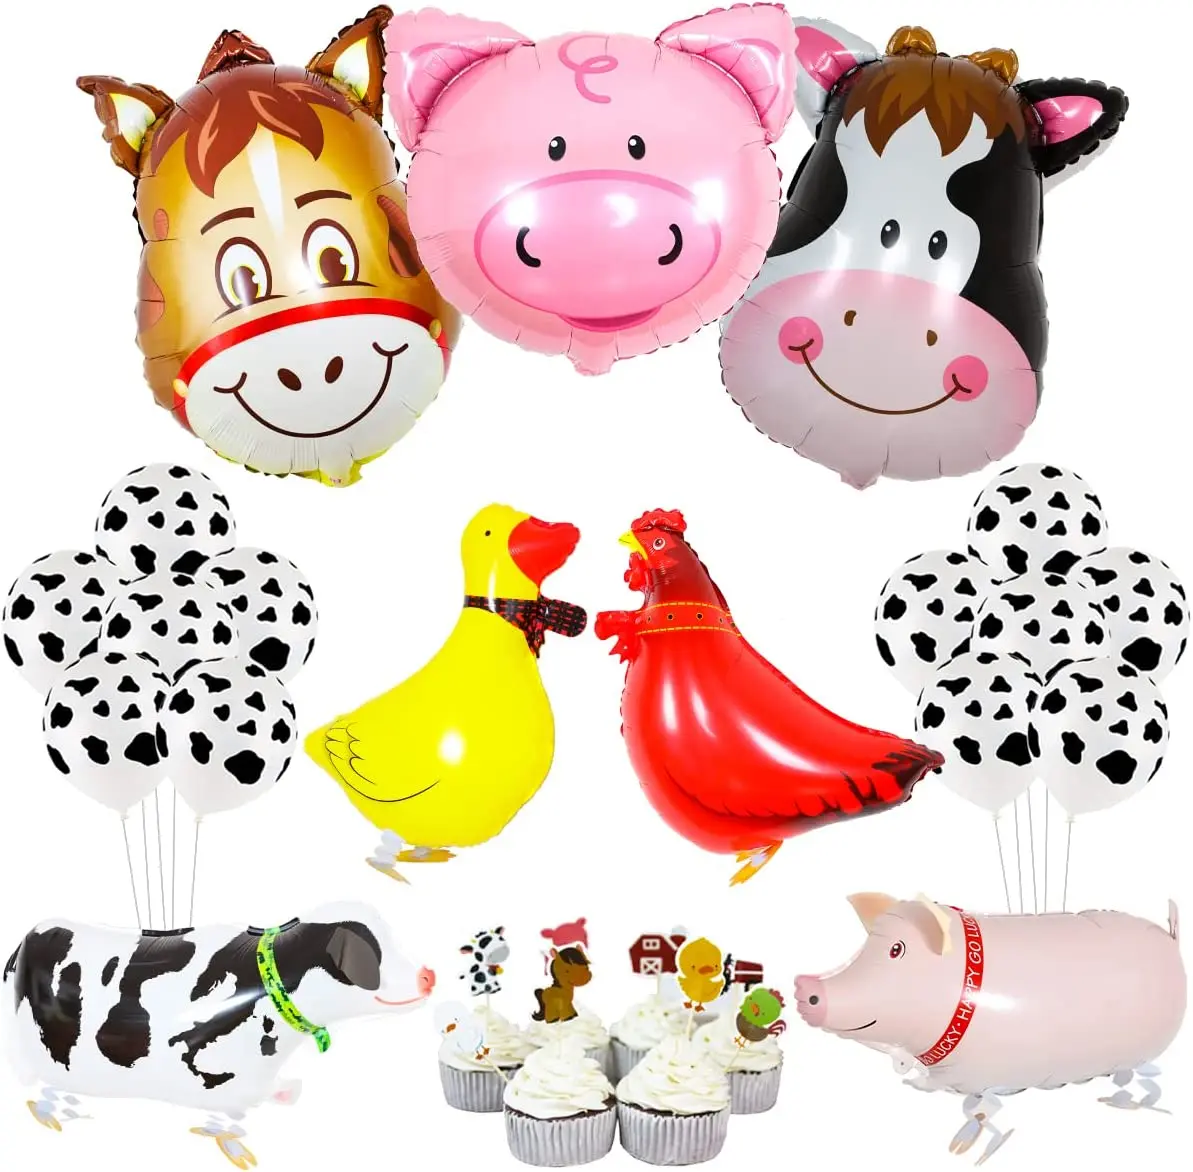 

Cheereveal Farm Animal Party Decorations Farm Walking Balloons Cupcake Toppers for Boy or Girls Barnyard Birthday Party Supplies